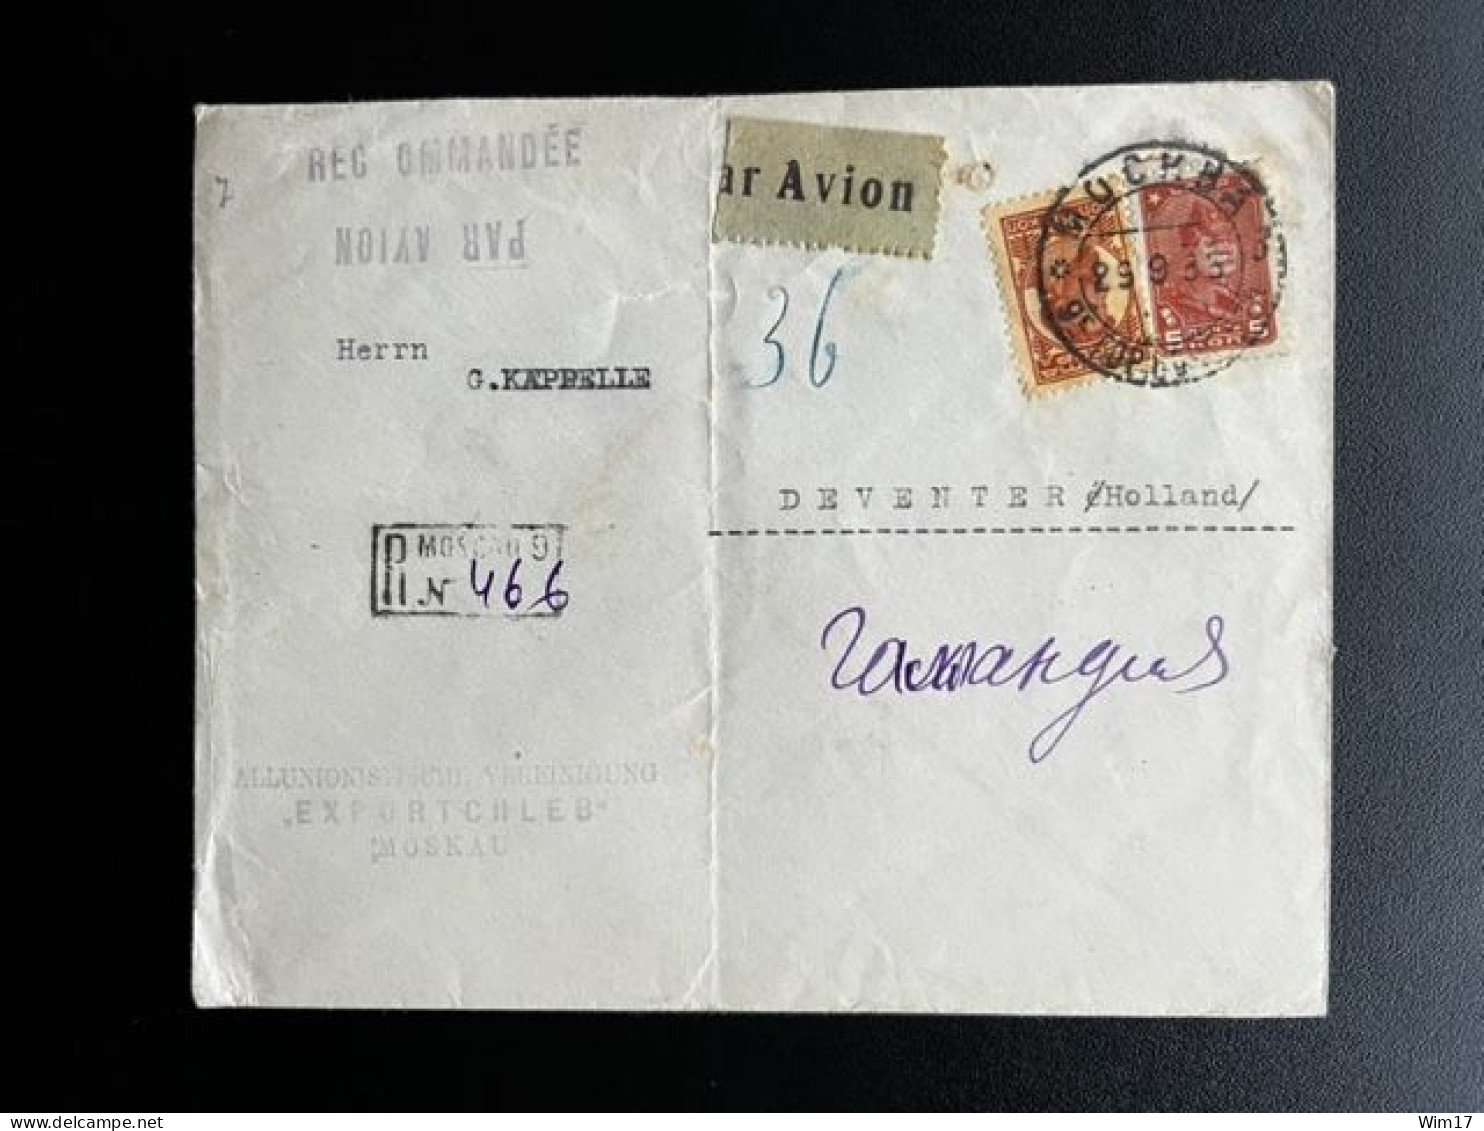 RUSSIA USSR 1935 REGISTERED LETTER MOSCOW TO DEVENTER 29-09-1935 SOVJET UNIE CCCP SOVIET UNION - Covers & Documents